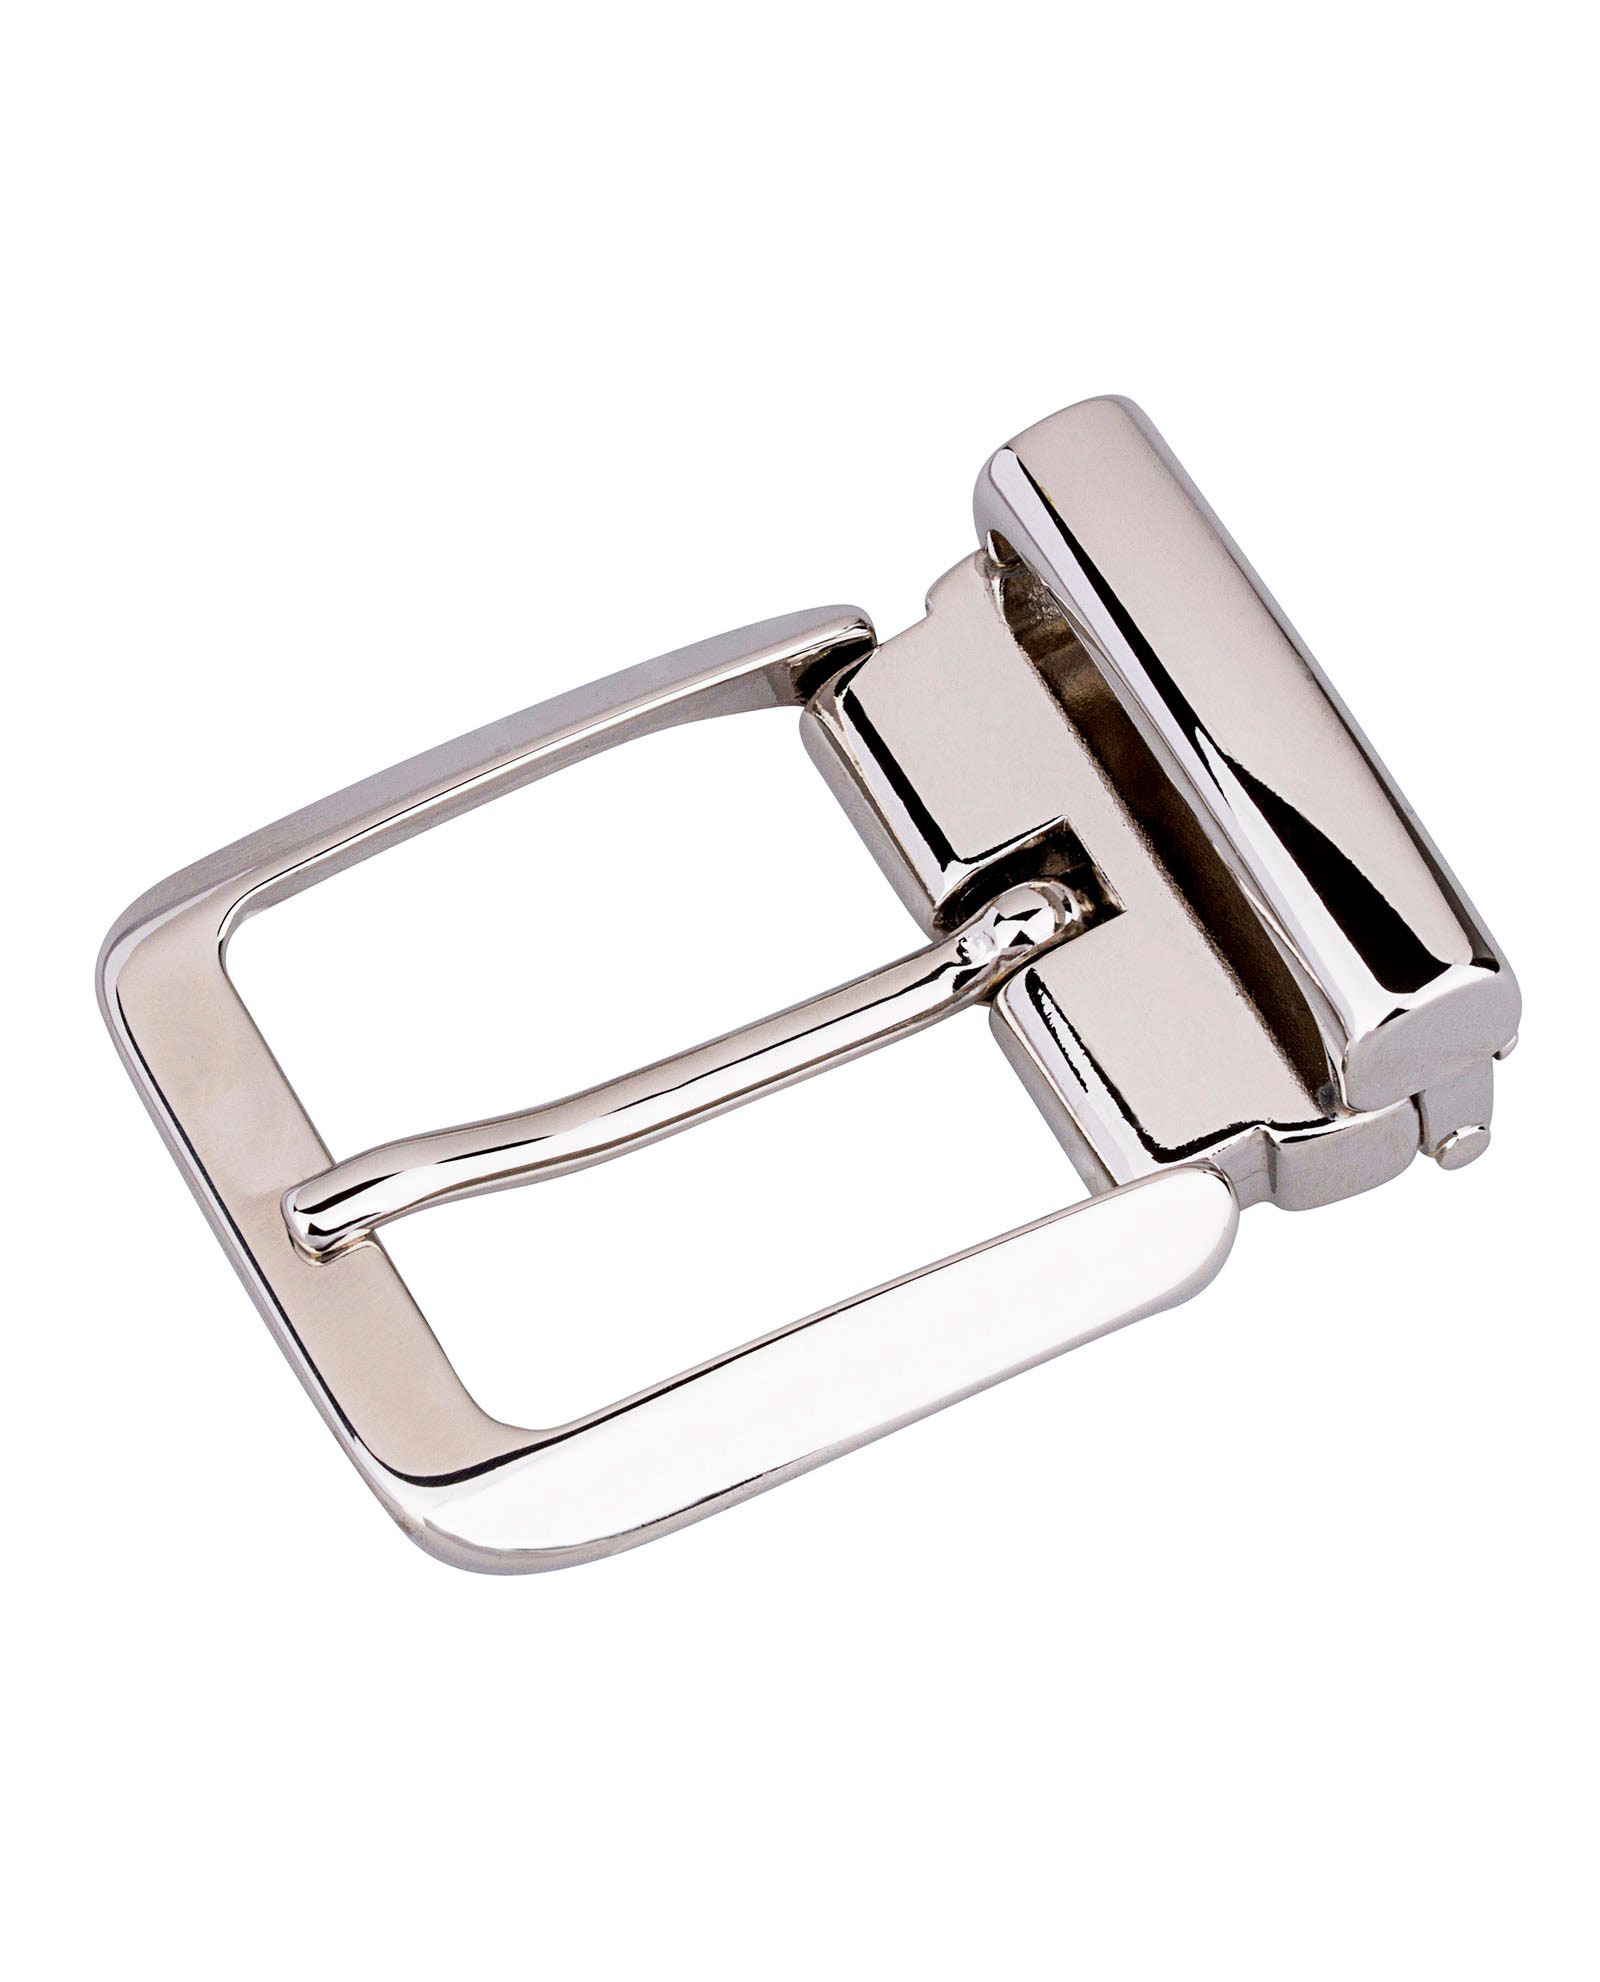 where to buy buckles